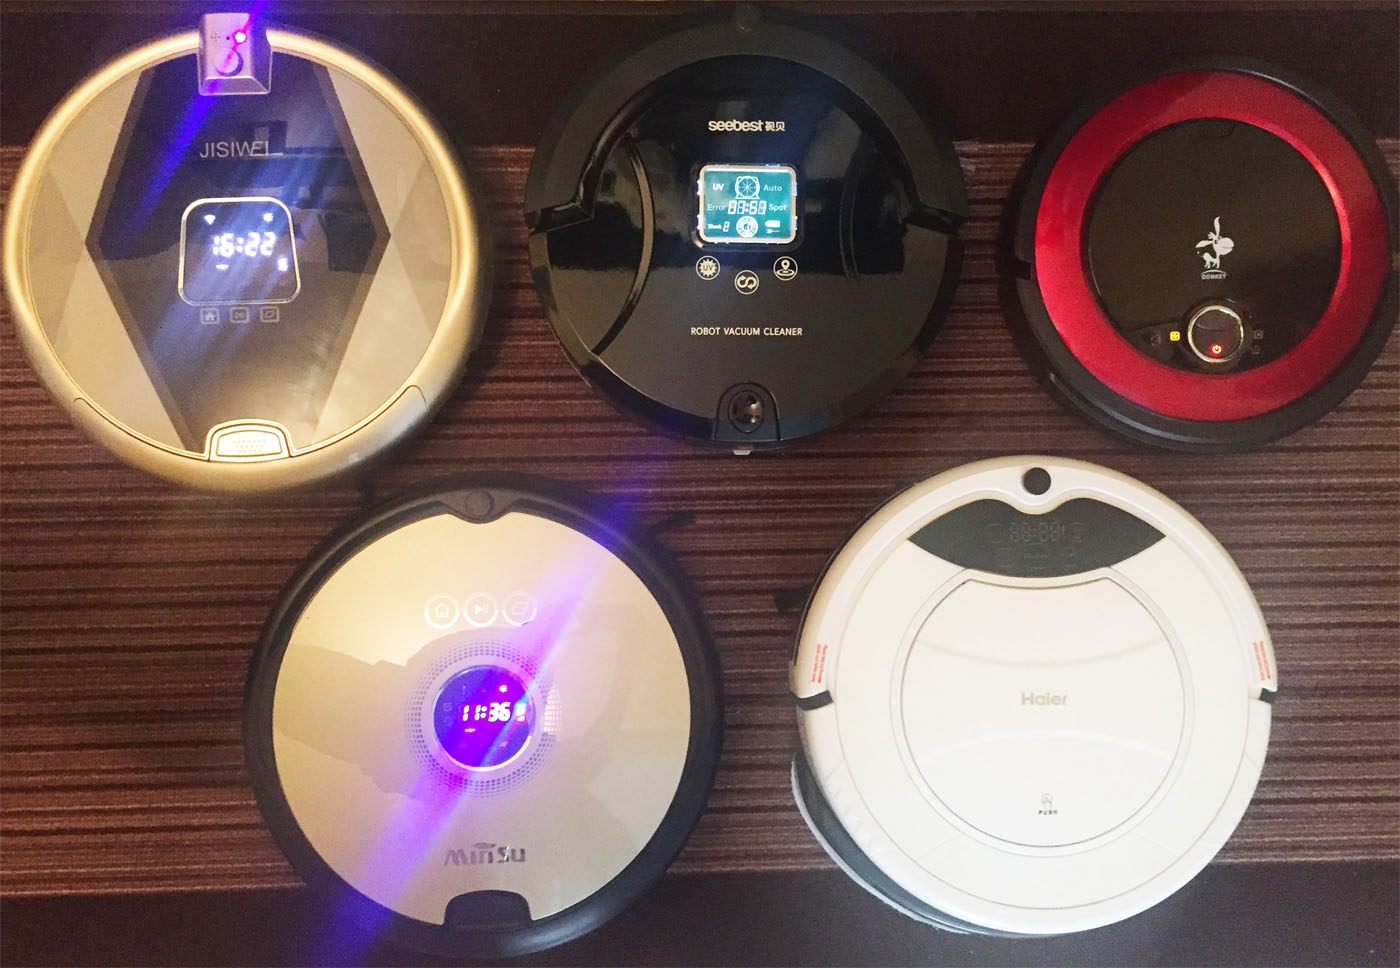 Best Robot Vacuum Cleaners – Guide to Choosing the Perfect Robotic Vac